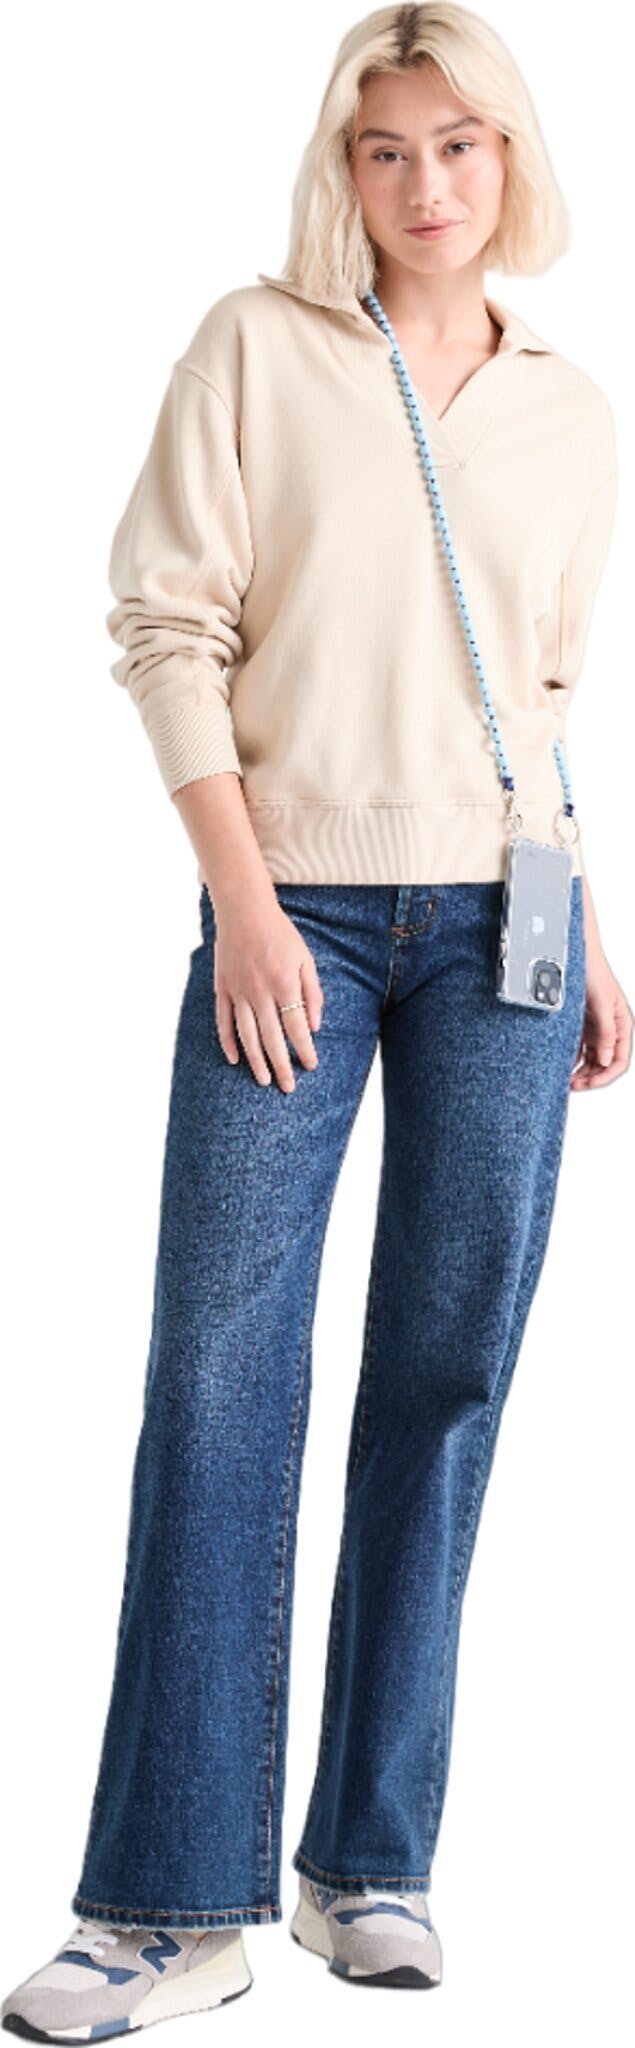 Product image for Midweight Performance Denim Wide Leg Jean - Women's